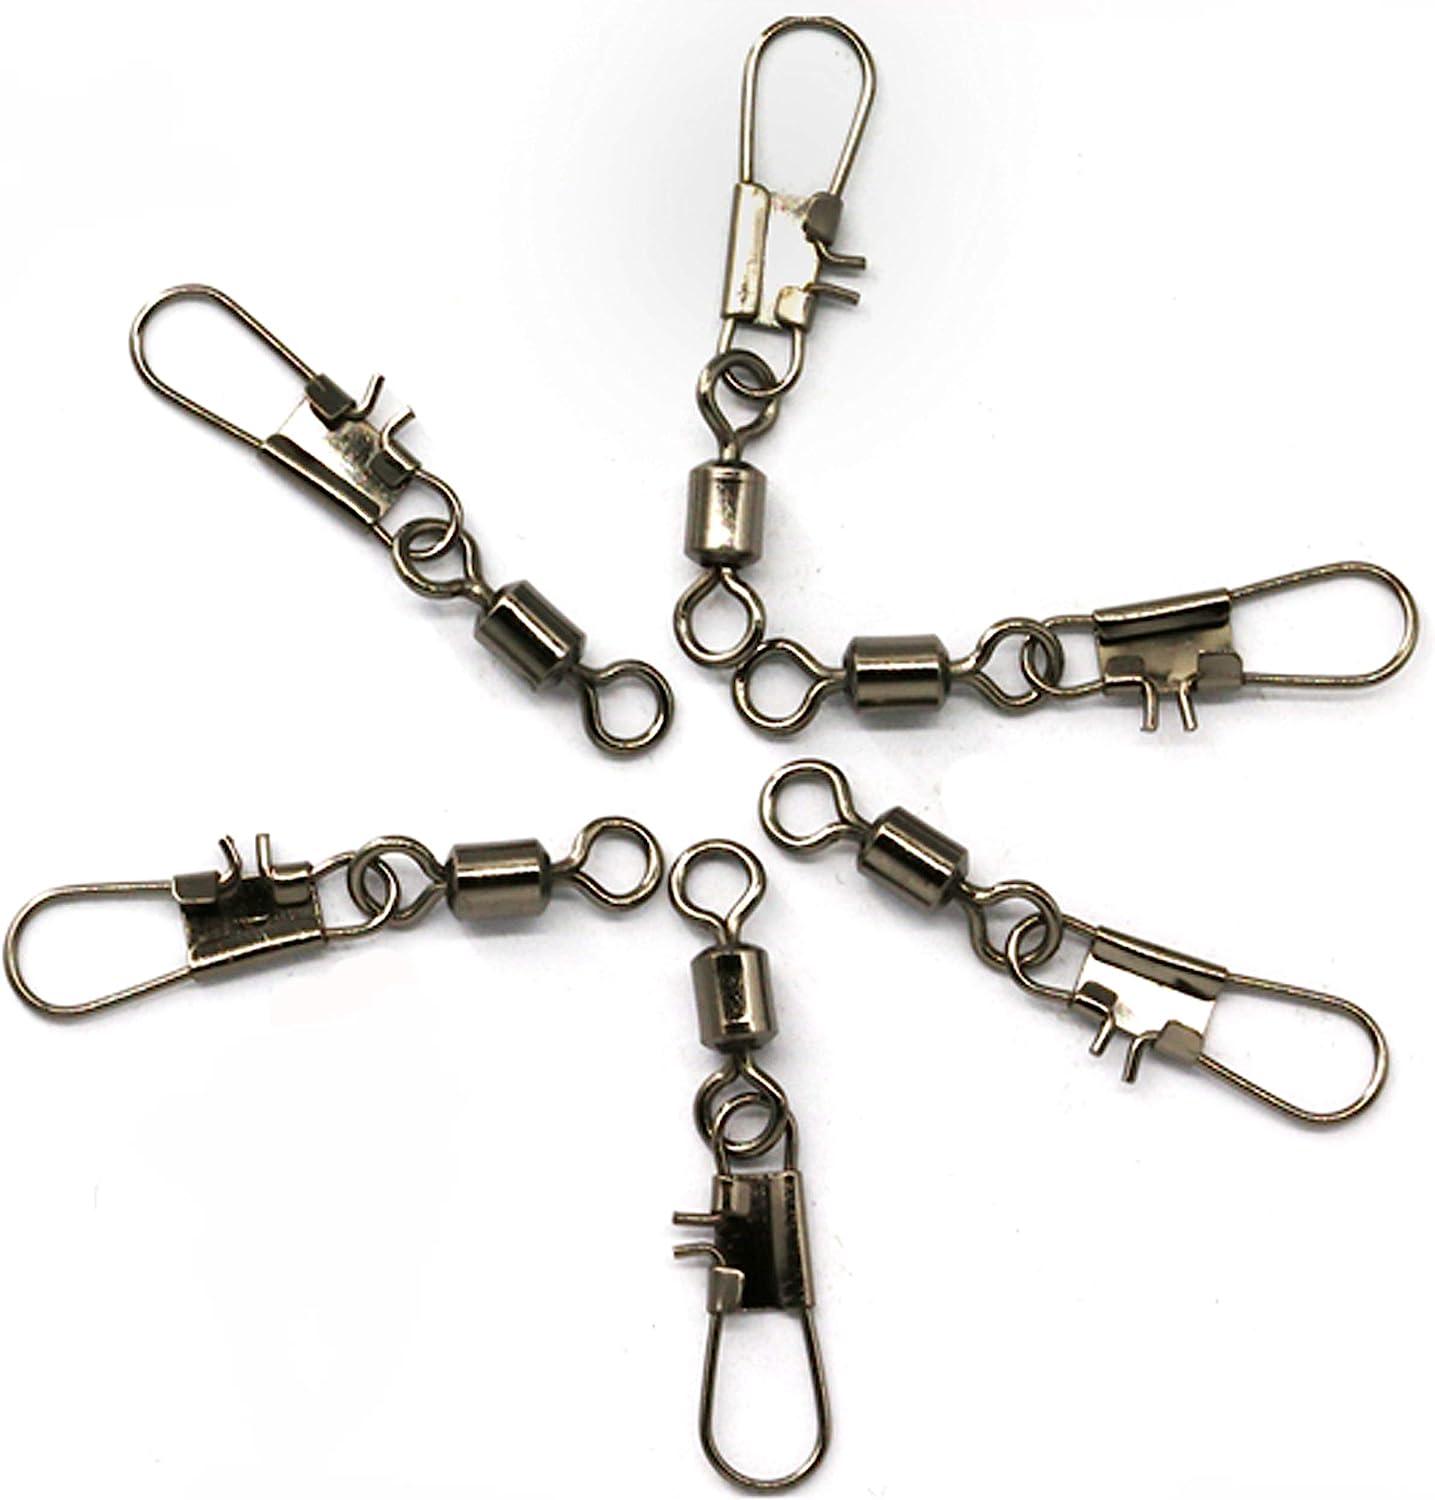 Barrel Snap Swivels Fishing, 100pcs Rolling Swivel with Safety